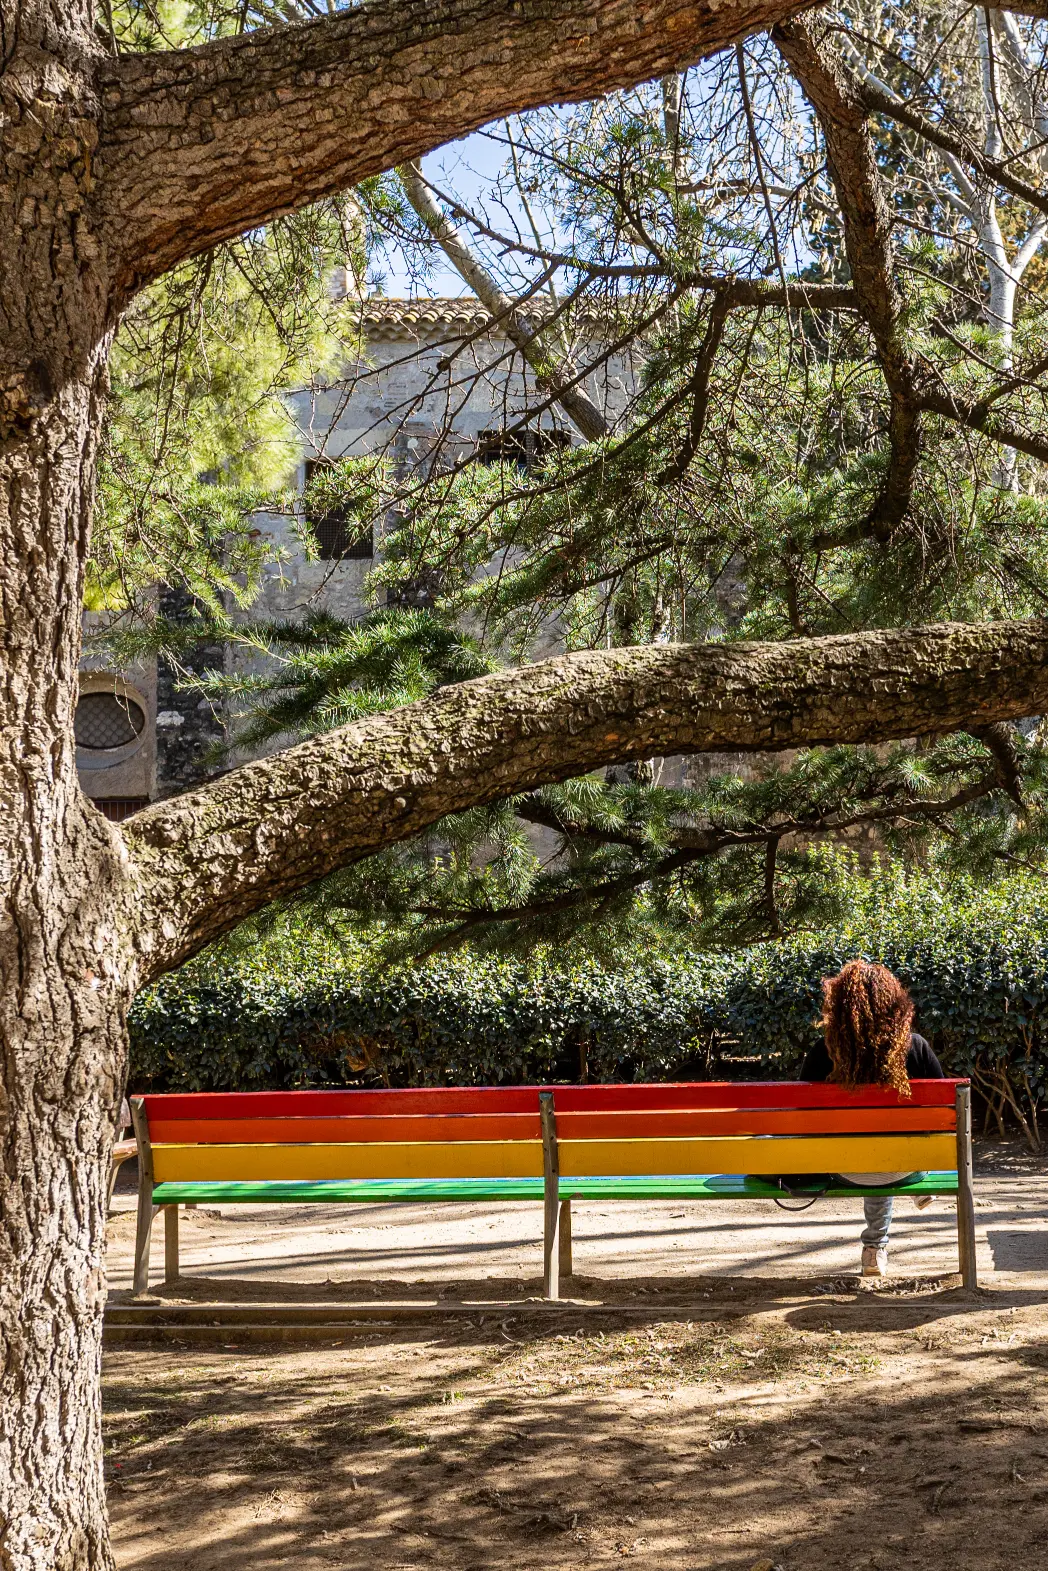 Rainbow colors in a bench of Sant Cugat del Vallés showing the welcoming enviroment it has